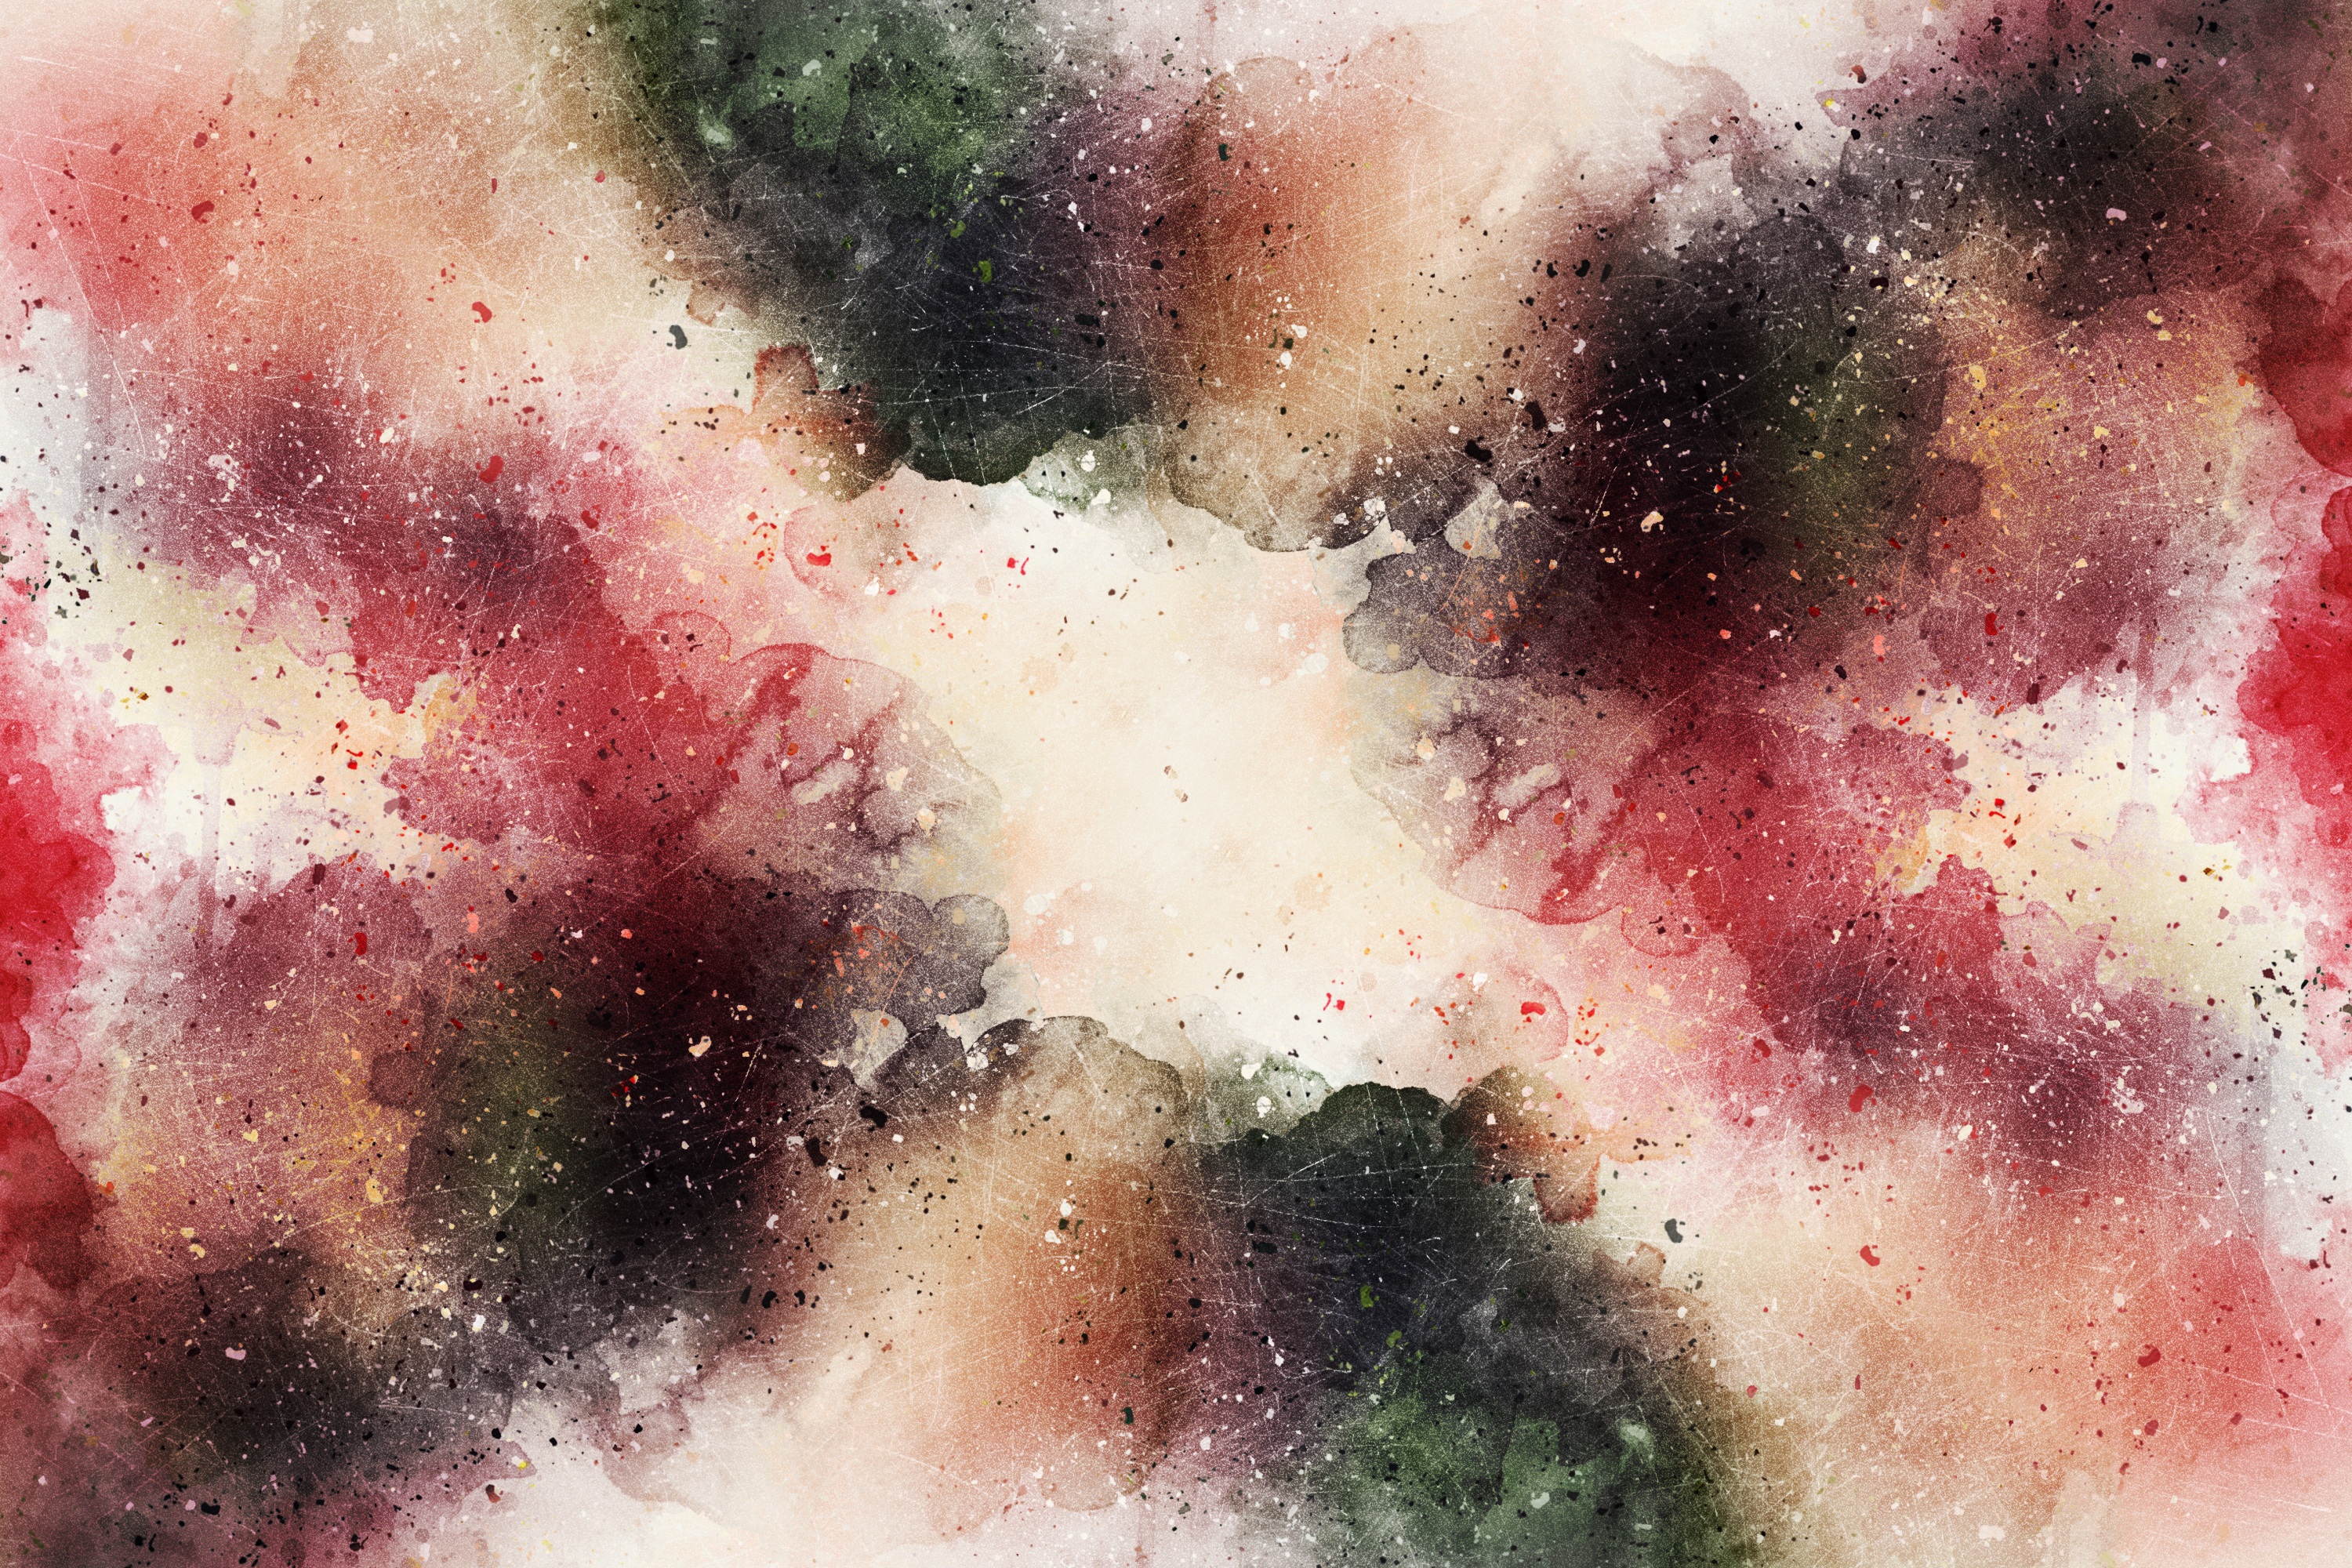 149307 free wallpaper 2160x3840 for phone, download images spots, watercolor, abstract, stains 2160x3840 for mobile